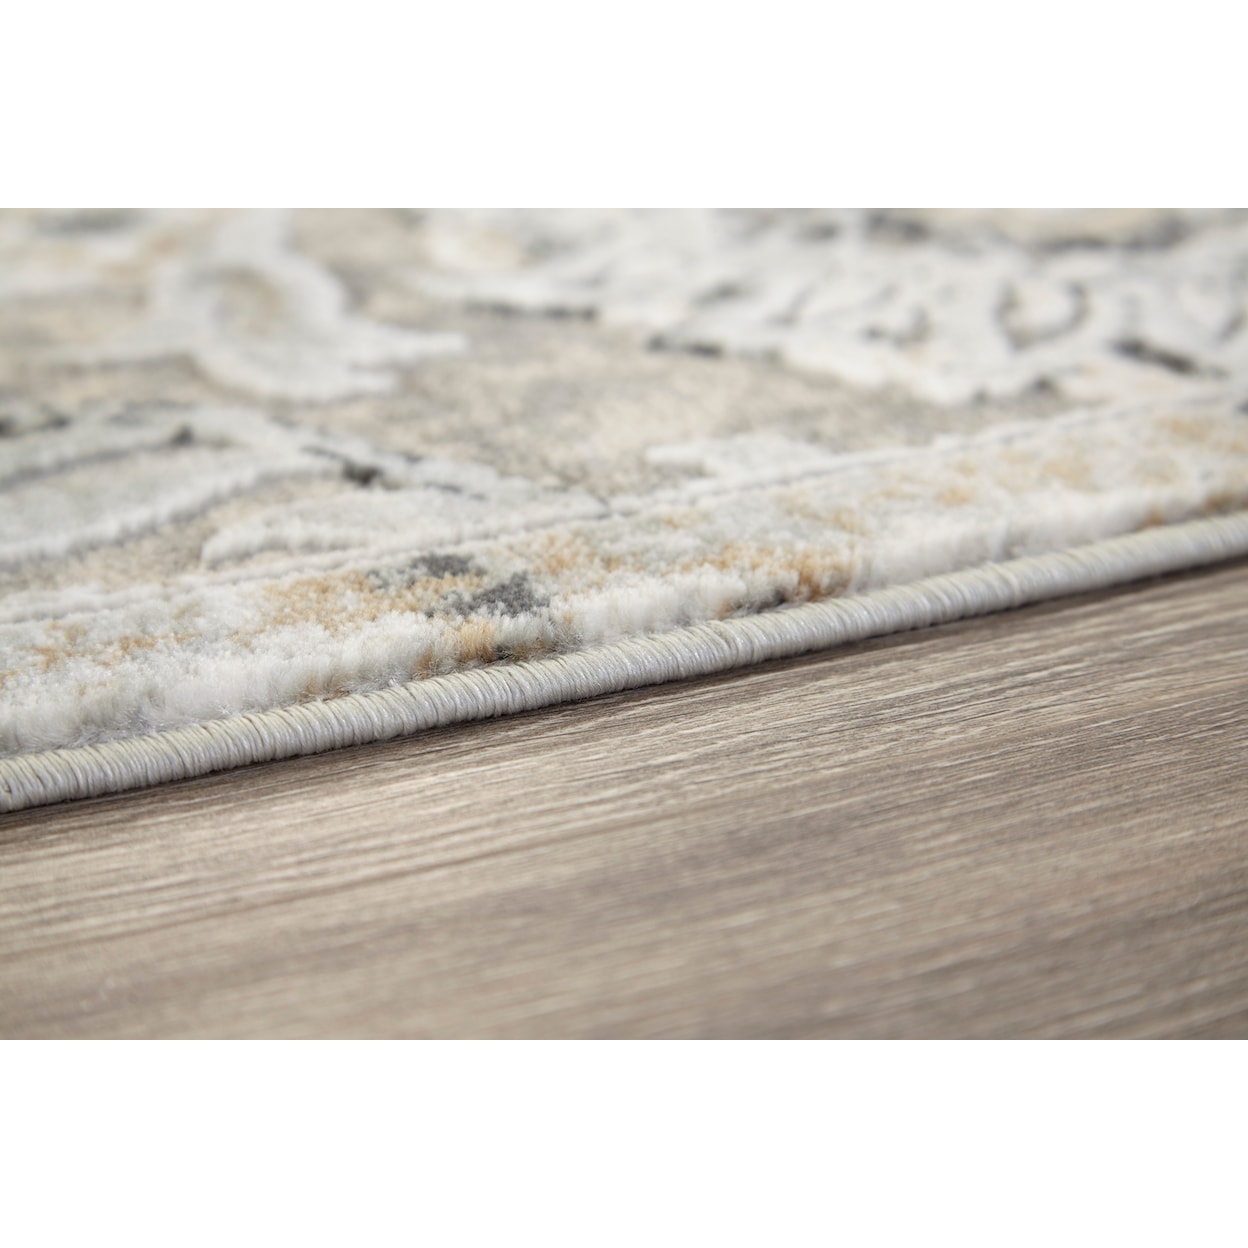 Signature Design by Ashley Traditional Classics Area Rugs Kilkenny Large Rug